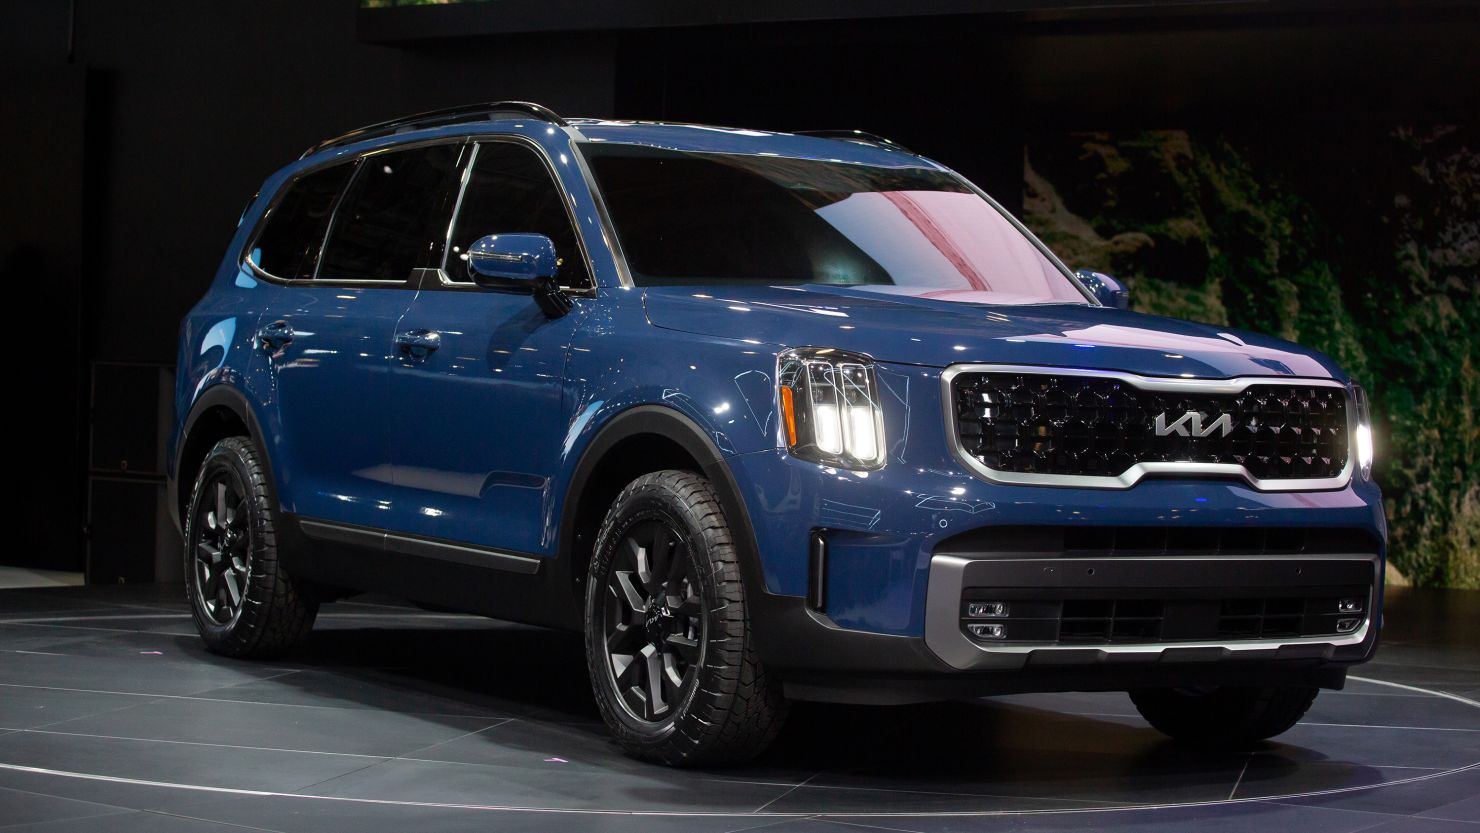 A Kia Telluride sports utility vehicle (SUV) is unveiled during the 2022 New York International Auto Show (NYIAS) in New York, U.S., on Wednesday, April 13, 2022. The NYIAS returns after being cancelled for two years due to the Covid-19 pandemic. Photographer: Michael Nagle/Bloomberg via Getty Images